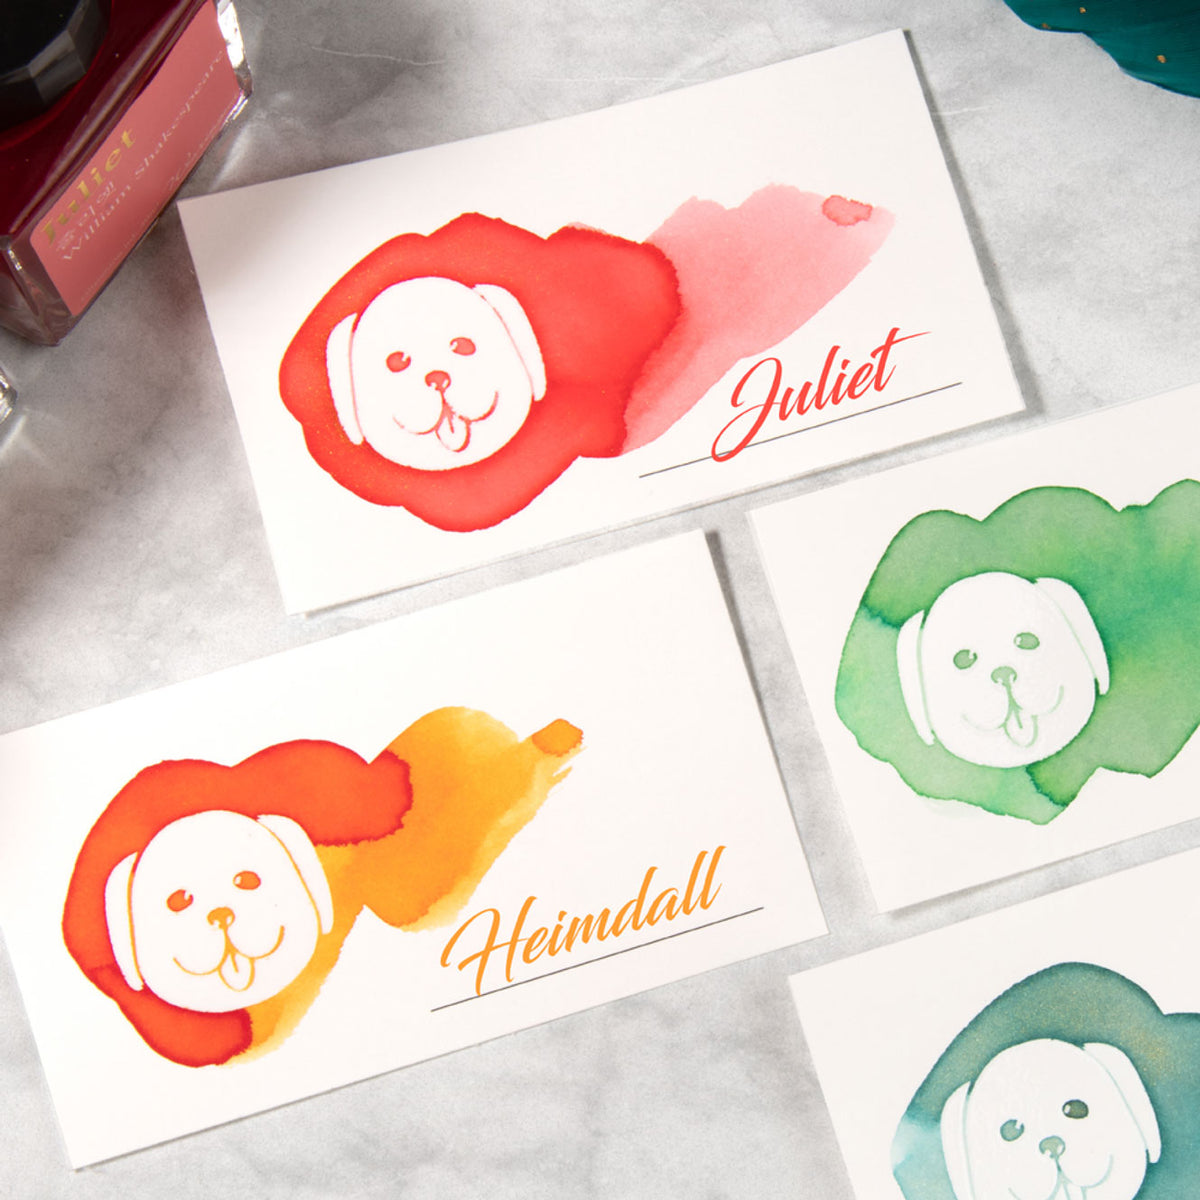 Wearingeul - Ink Swatch Cards - Puppy